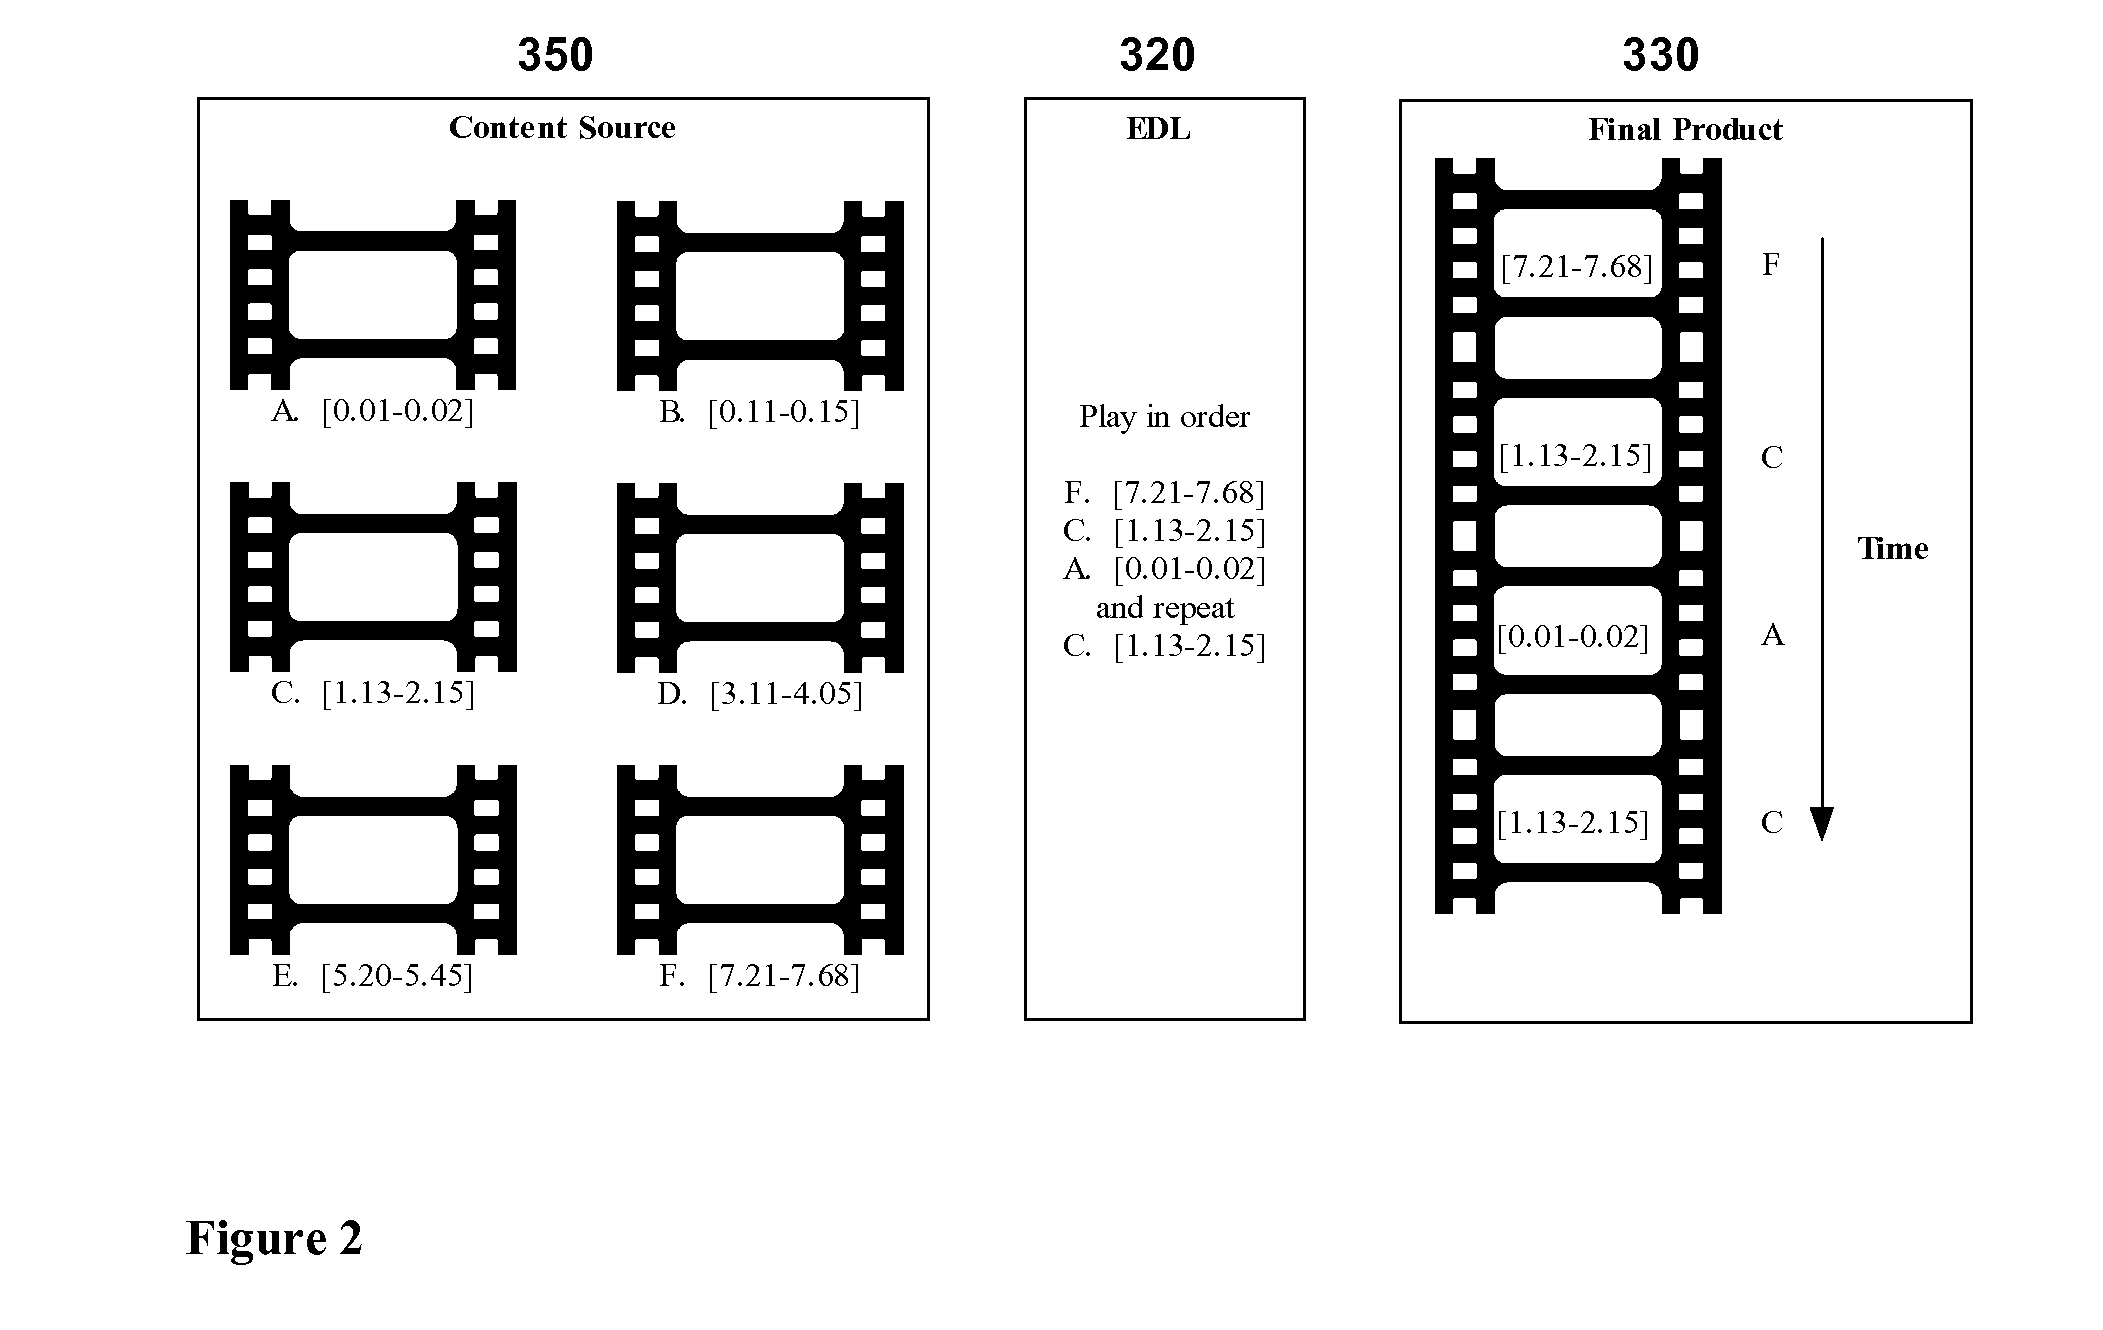 System and method for distributing a media product by providing access to an edit decision list